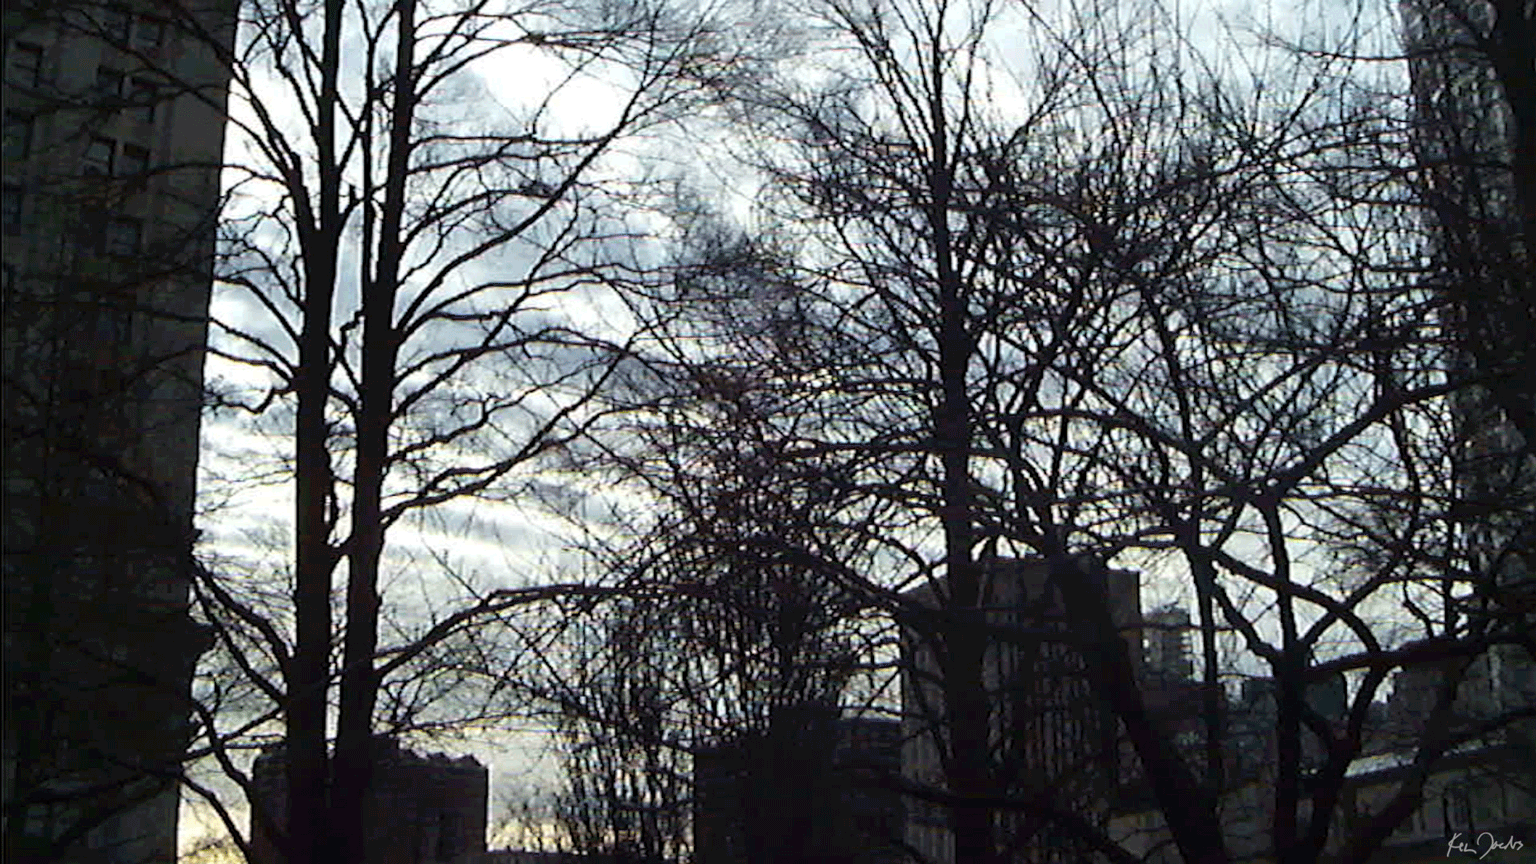 Buildings and Trees